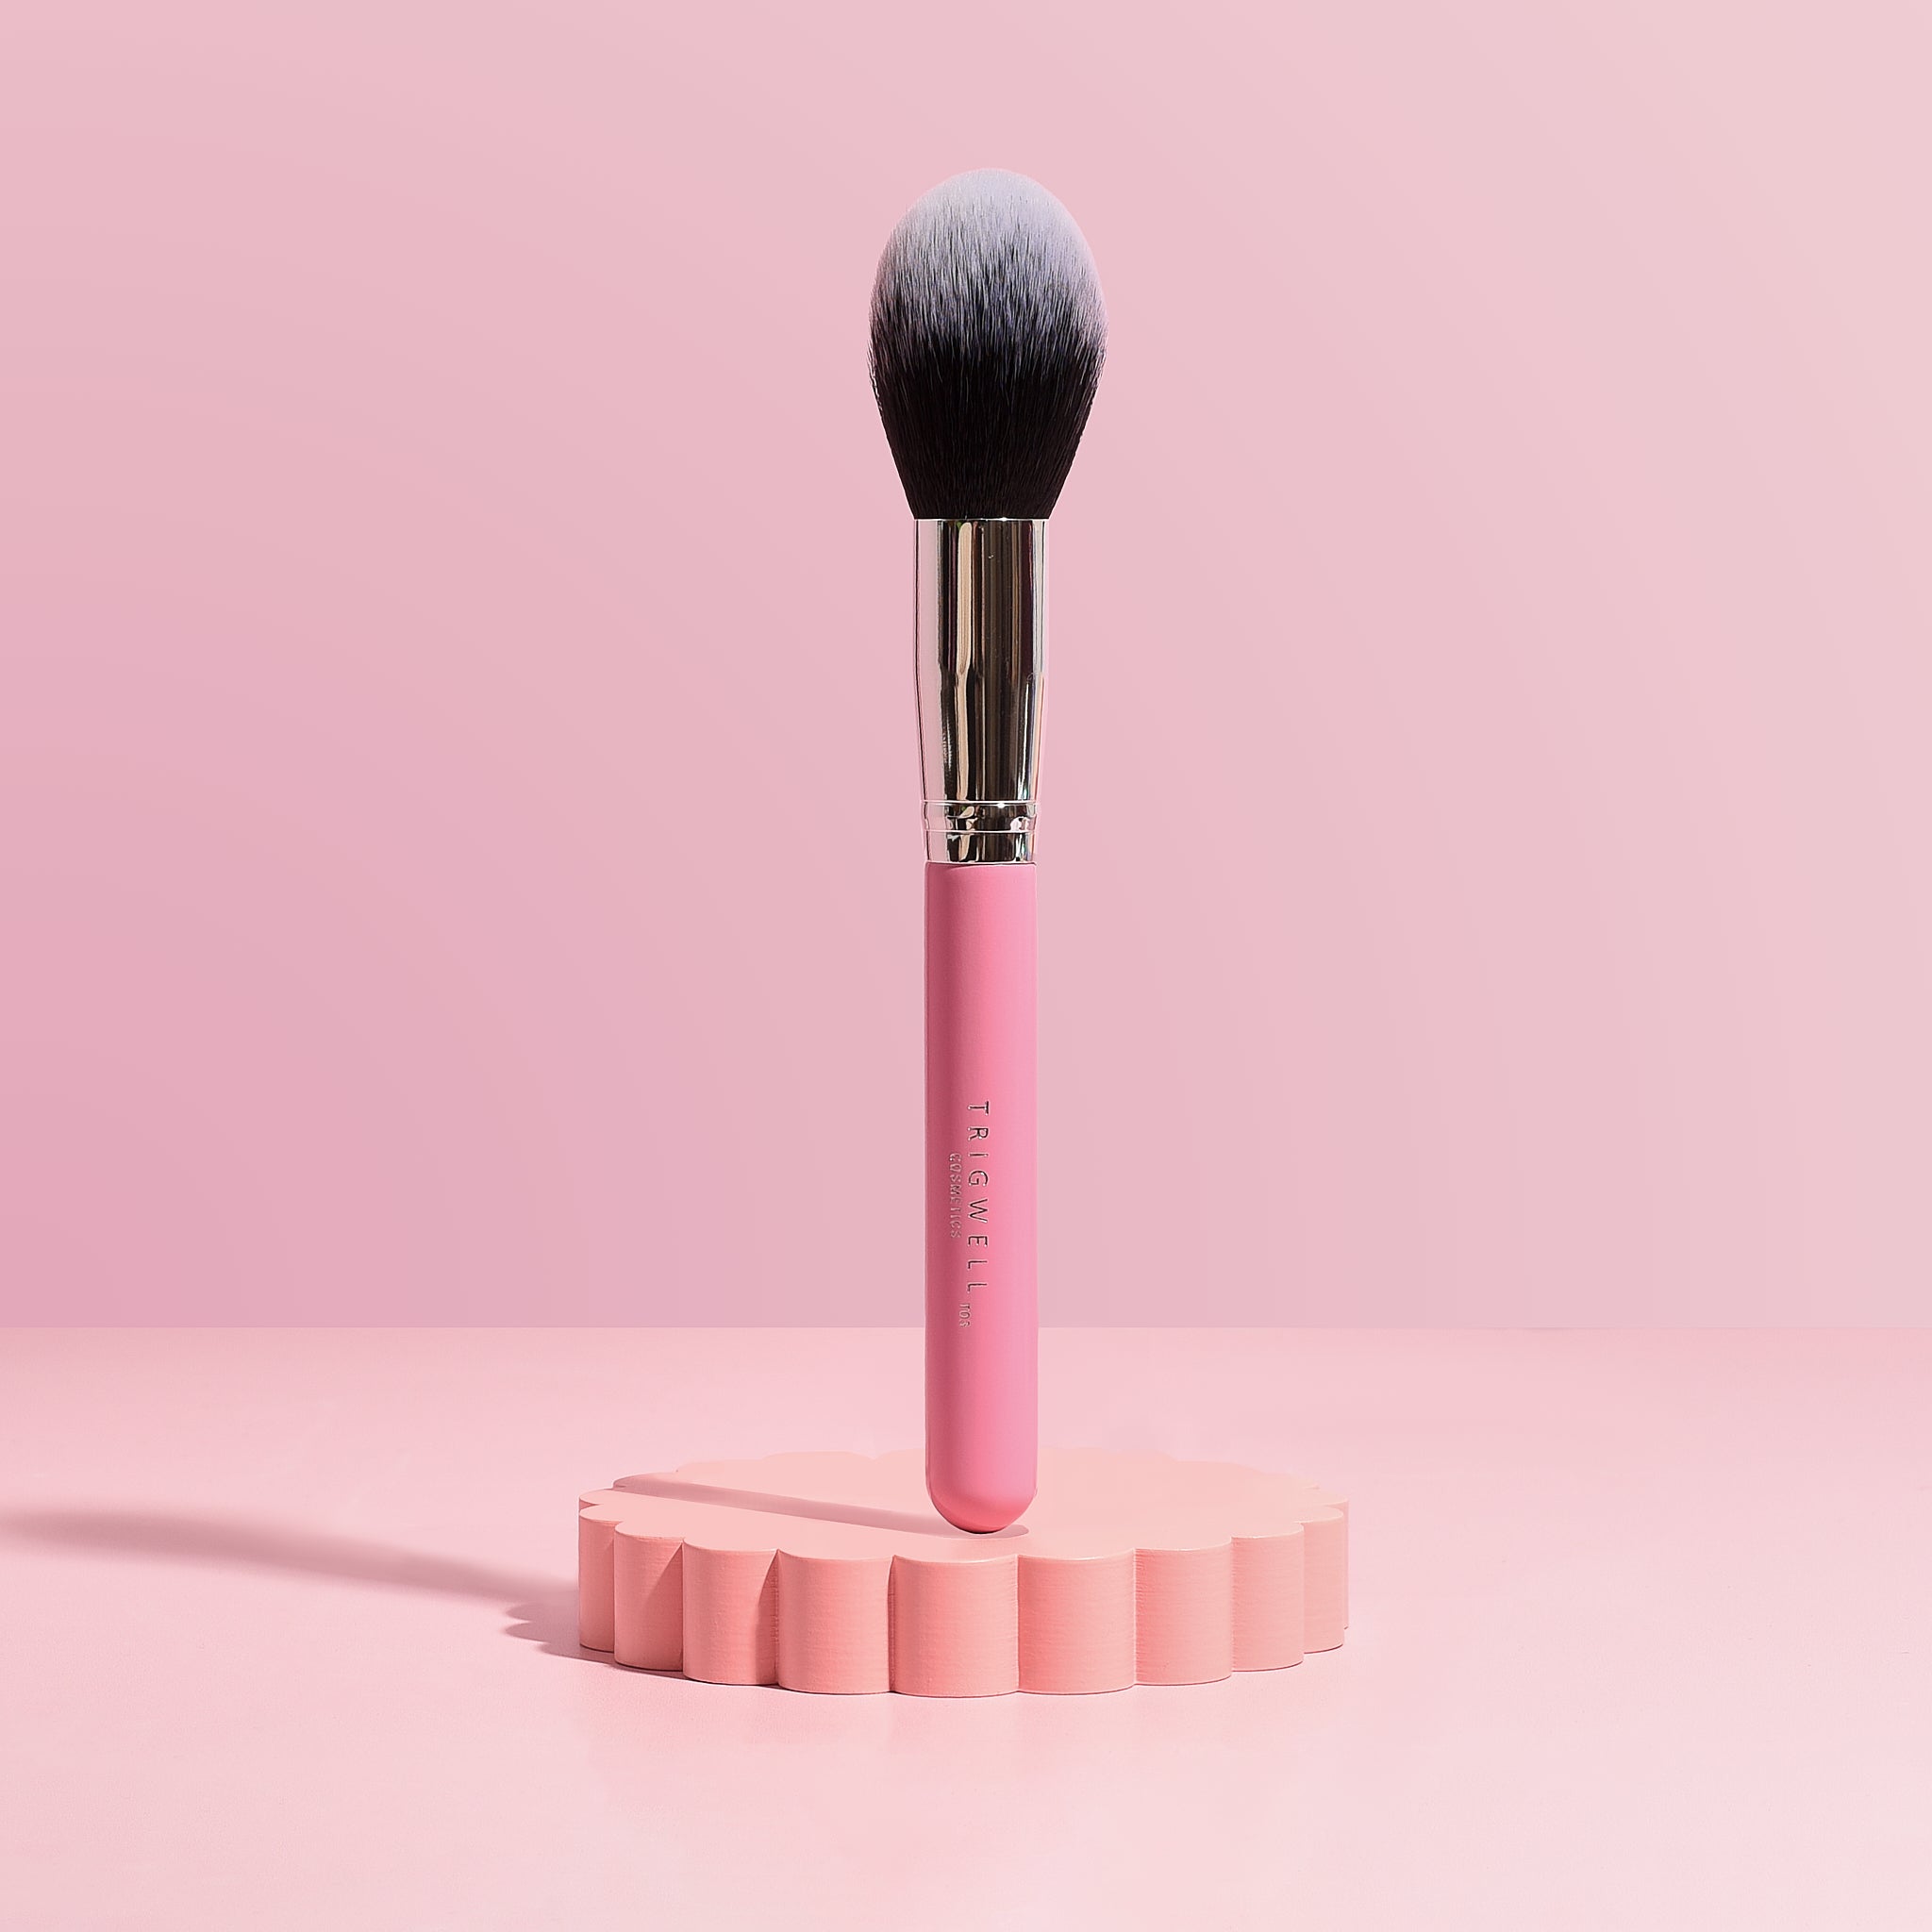 Image of T03 brush - a large fluffy powder brush with a pink handle 